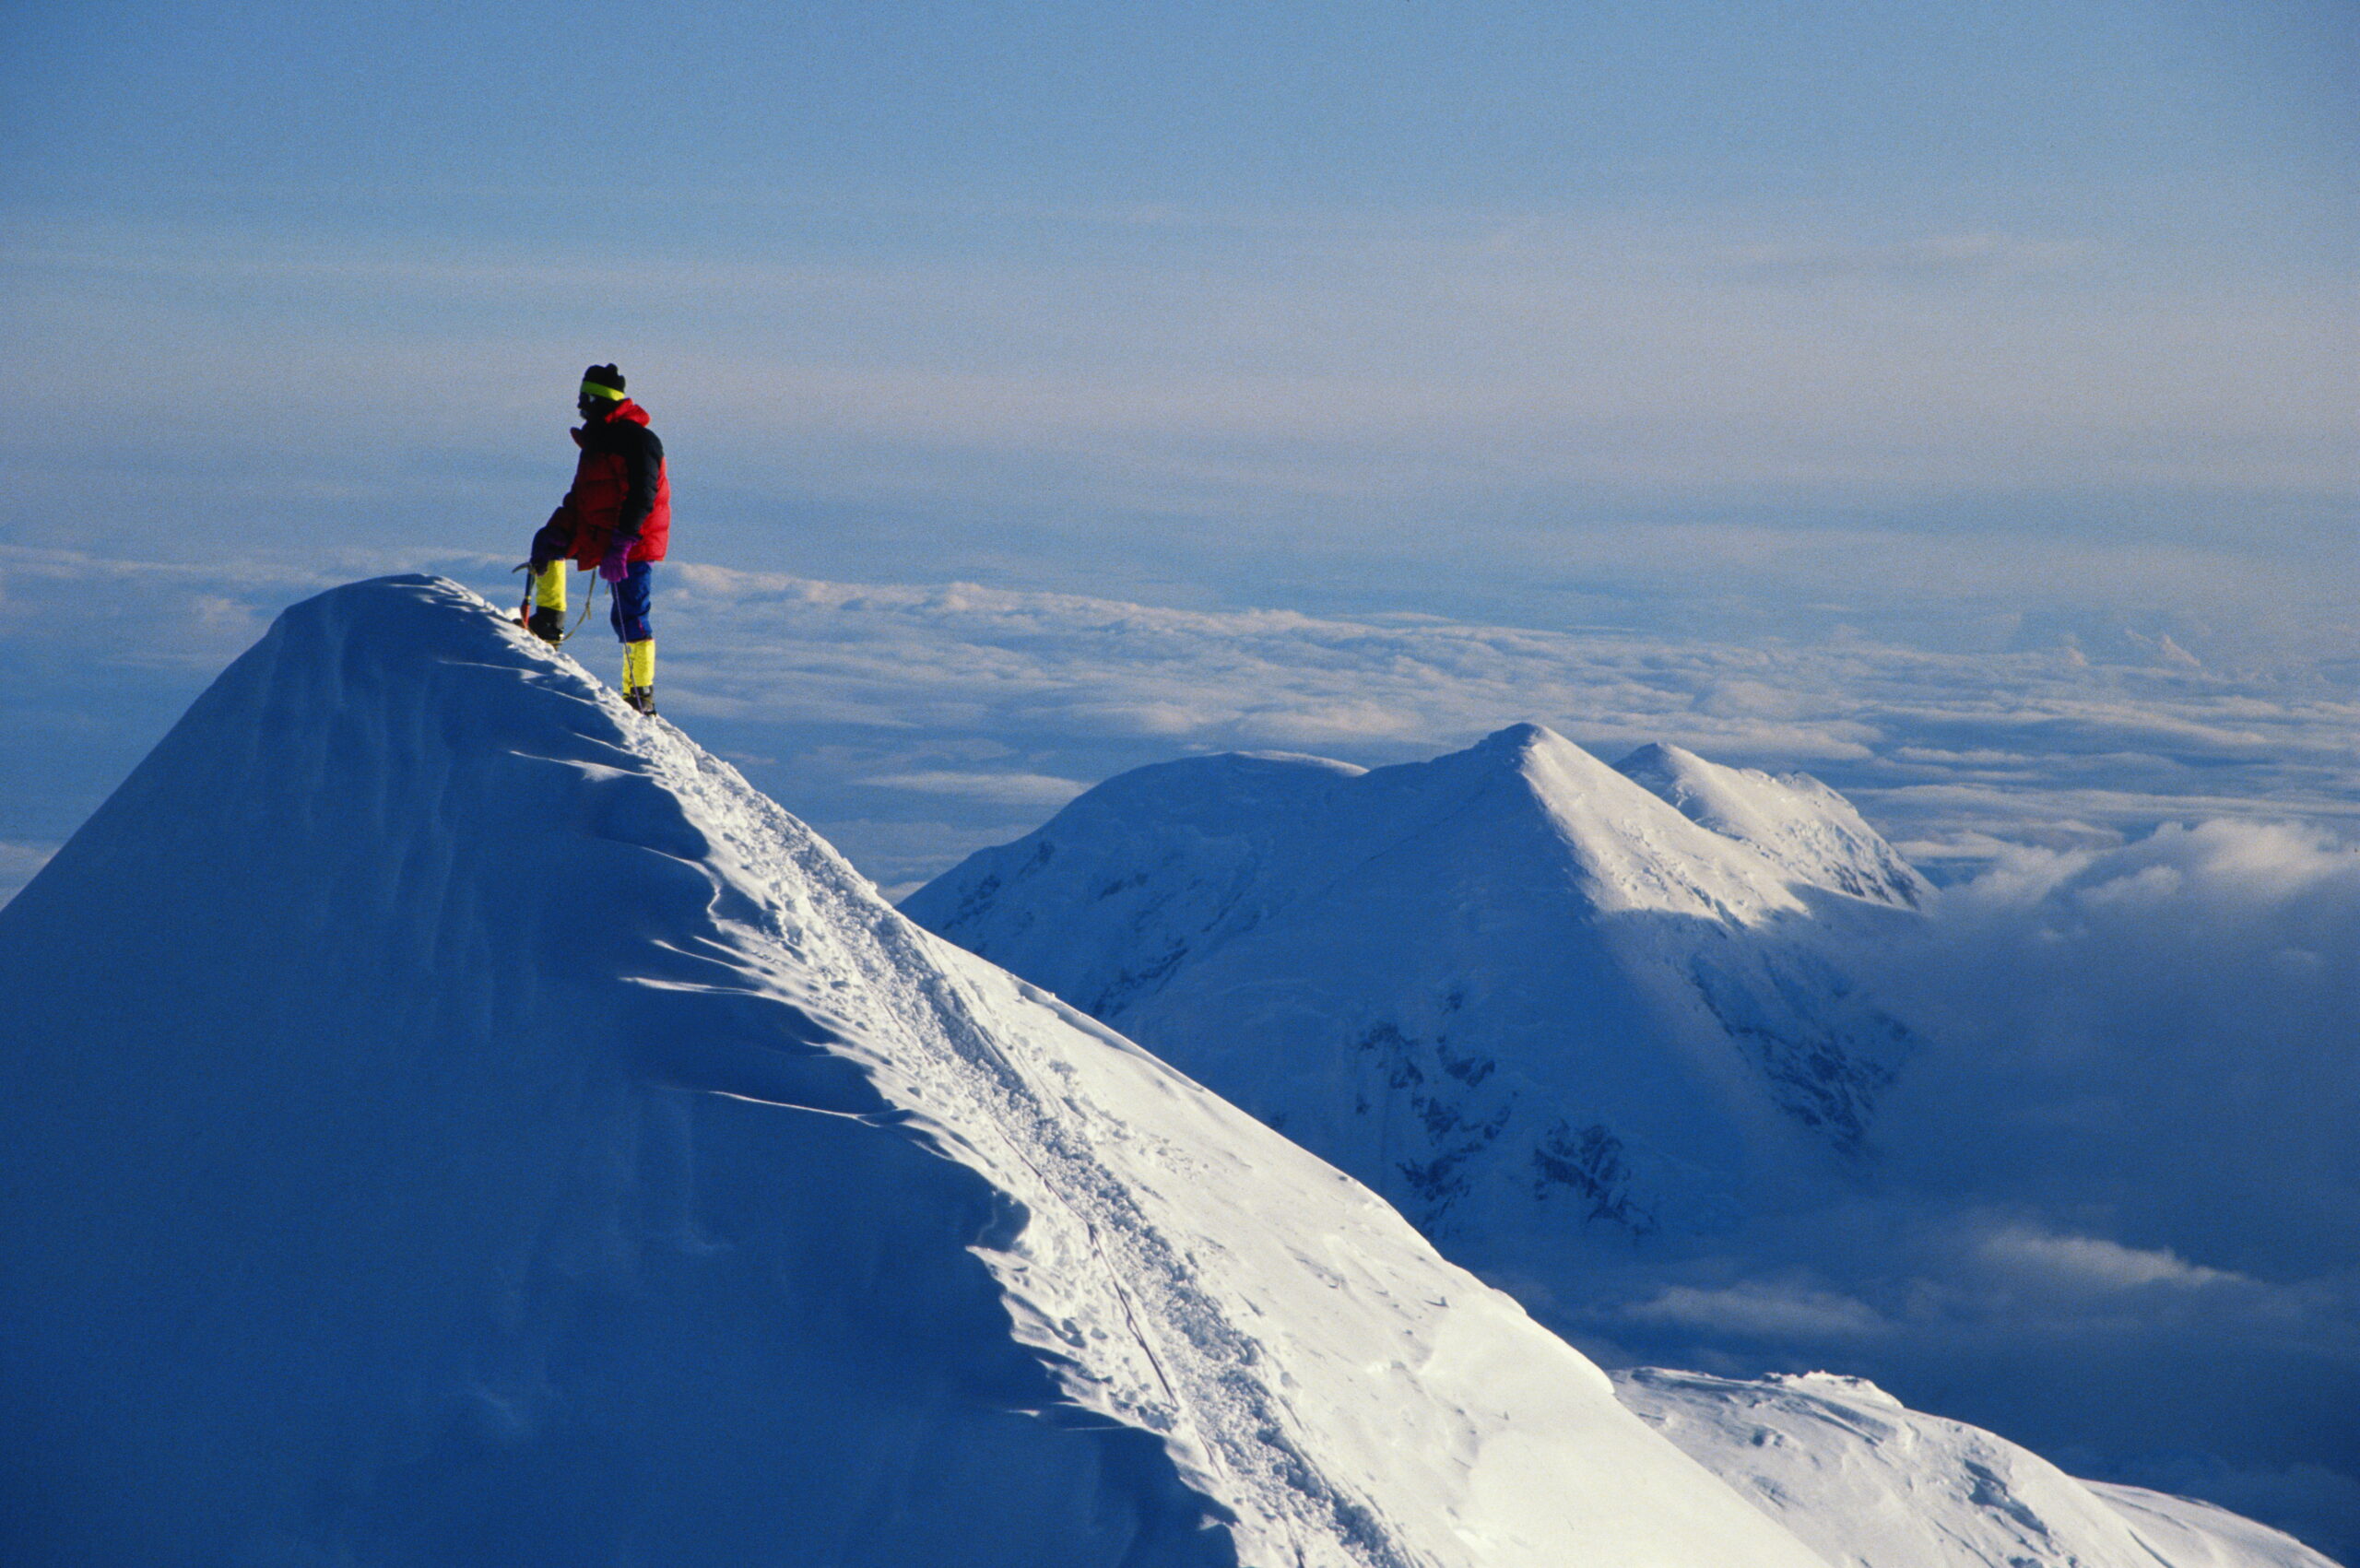 A mountain climber on the summit of a snowy peak